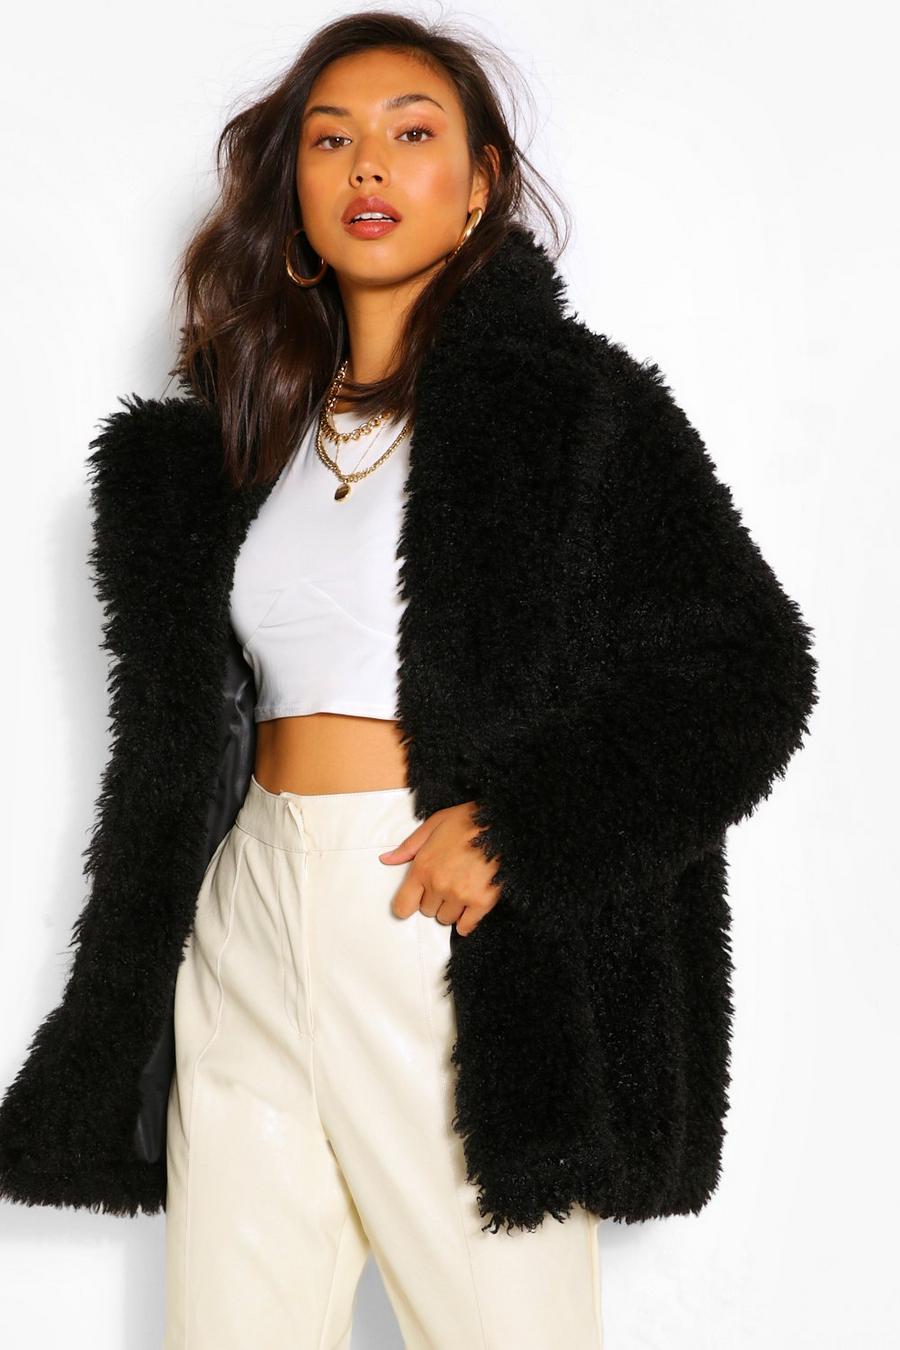 House of Fluff Synthetic Teddy Coat in Black Womens Clothing Jackets Fur jackets 